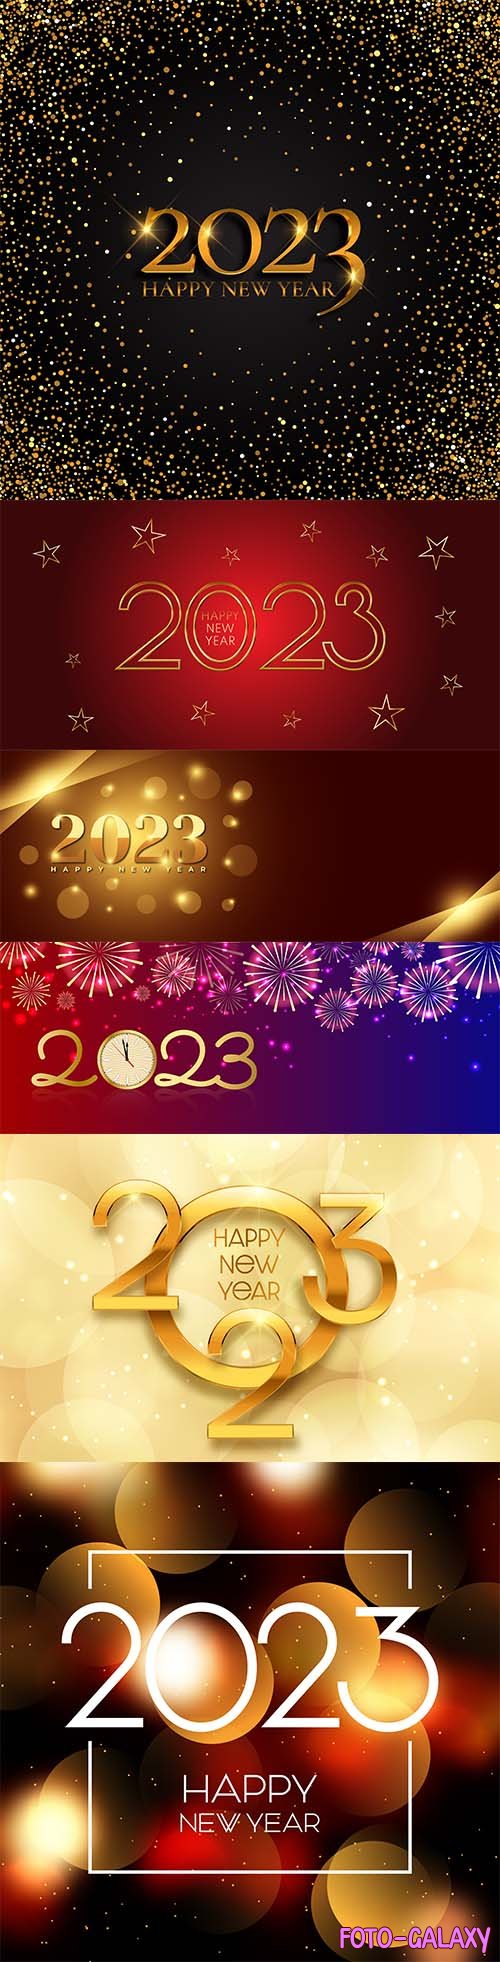 Vector happy new year background with gold numbers 2023 and confetti